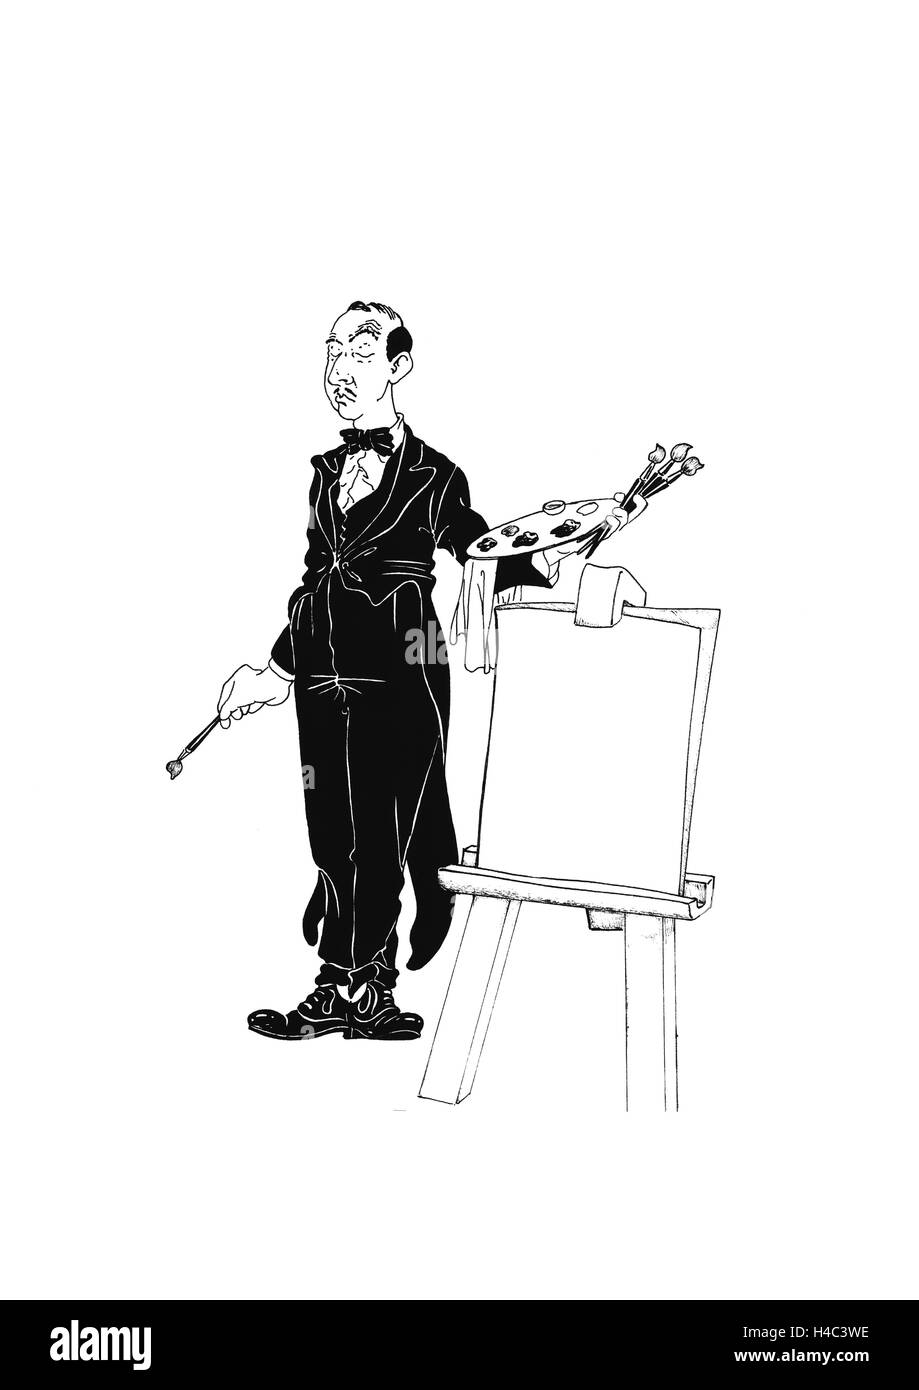 Waiter with easel, paint and brush Stock Photo